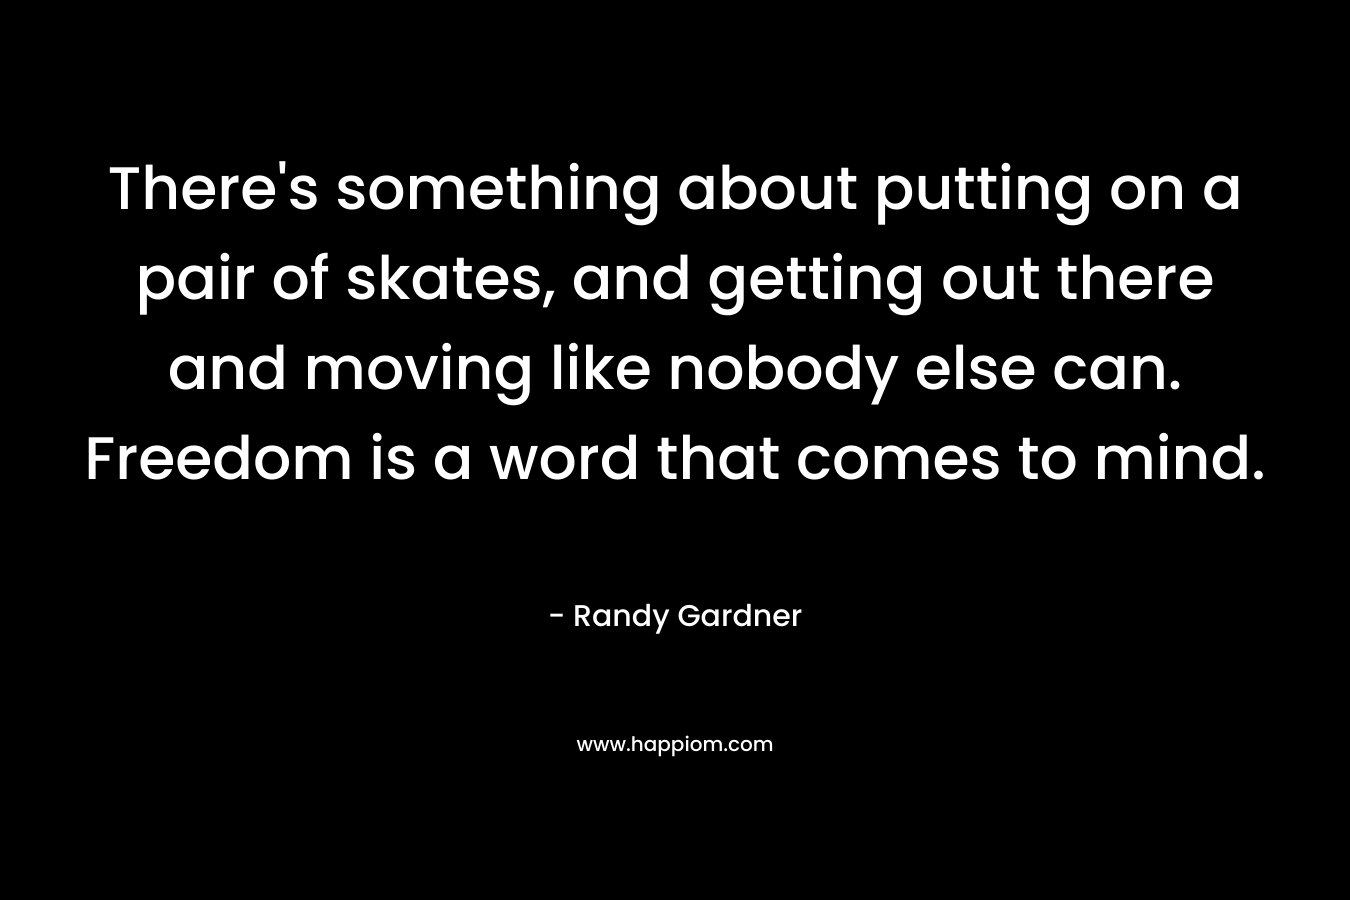 There's something about putting on a pair of skates, and getting out there and moving like nobody else can. Freedom is a word that comes to mind.